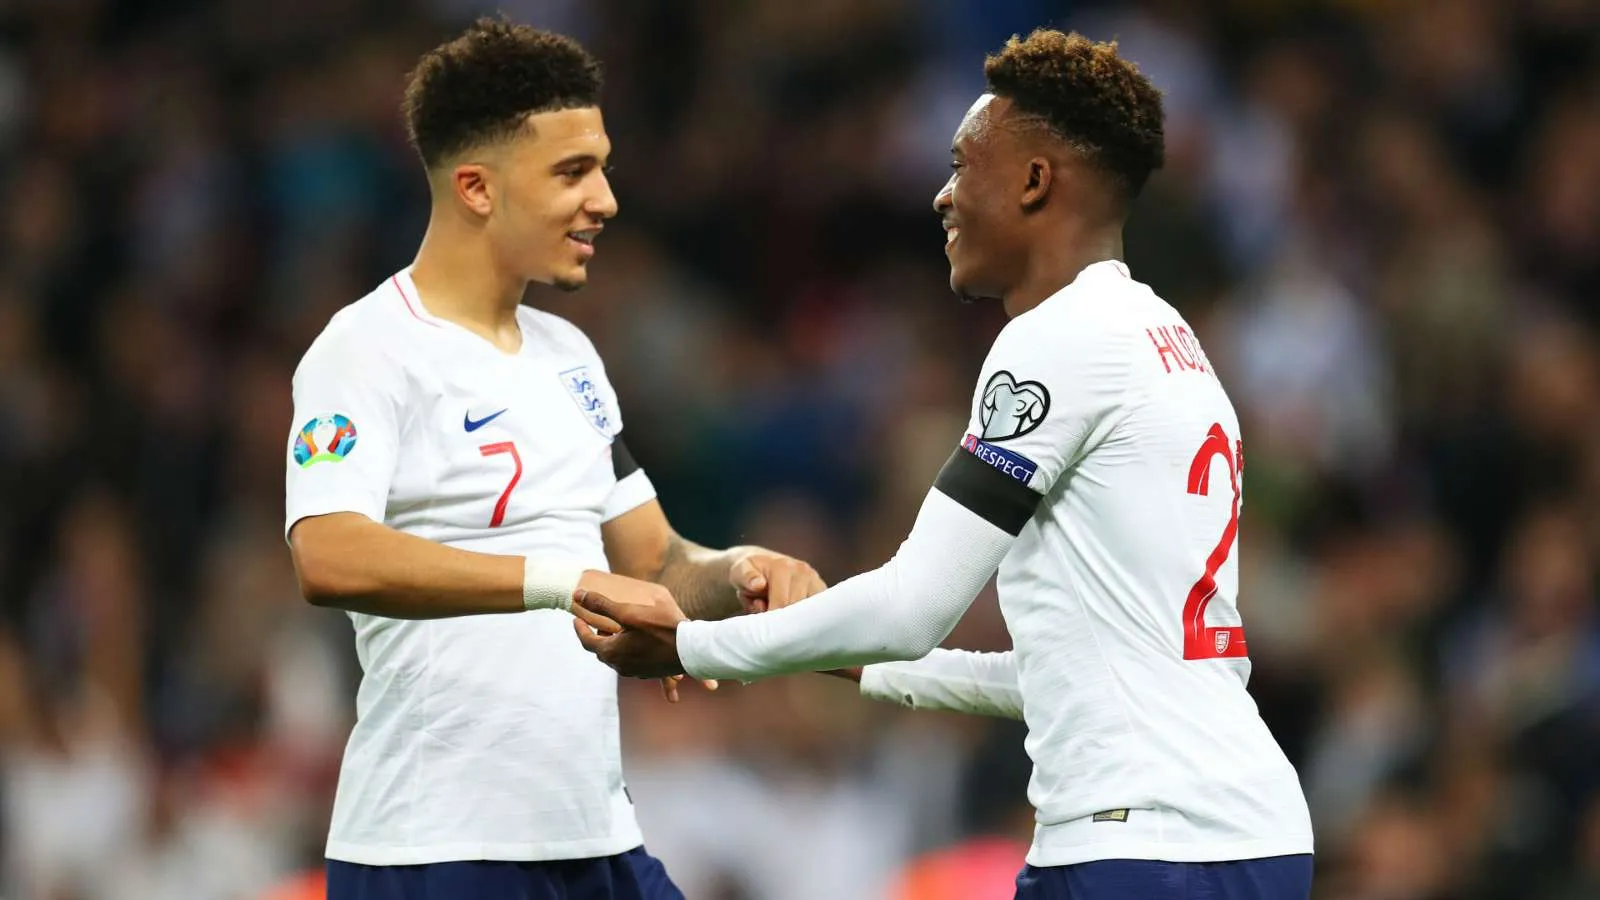 'I'd love Sancho to come to Chelsea' - Hudson-Odoi eager to link-up with England team-mate at Stamford Bridge - Bóng Đá